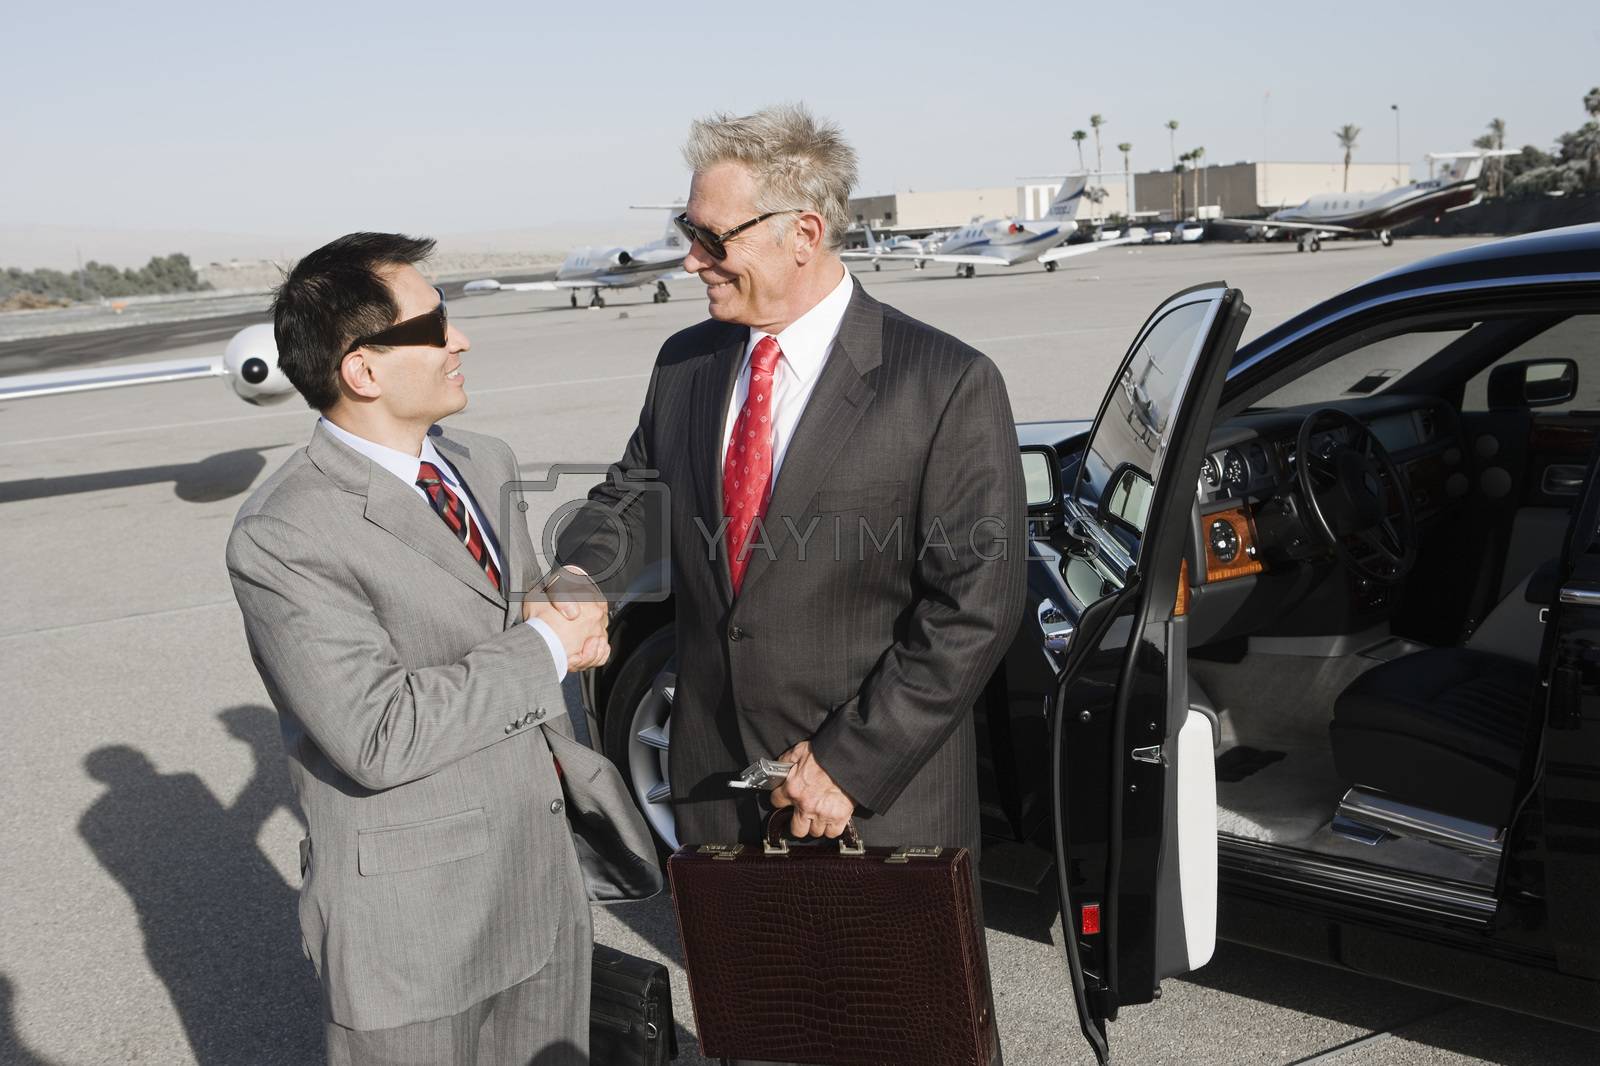 Royalty free image of Two successful businessmen shaking hands while standing by car at airfield by moodboard